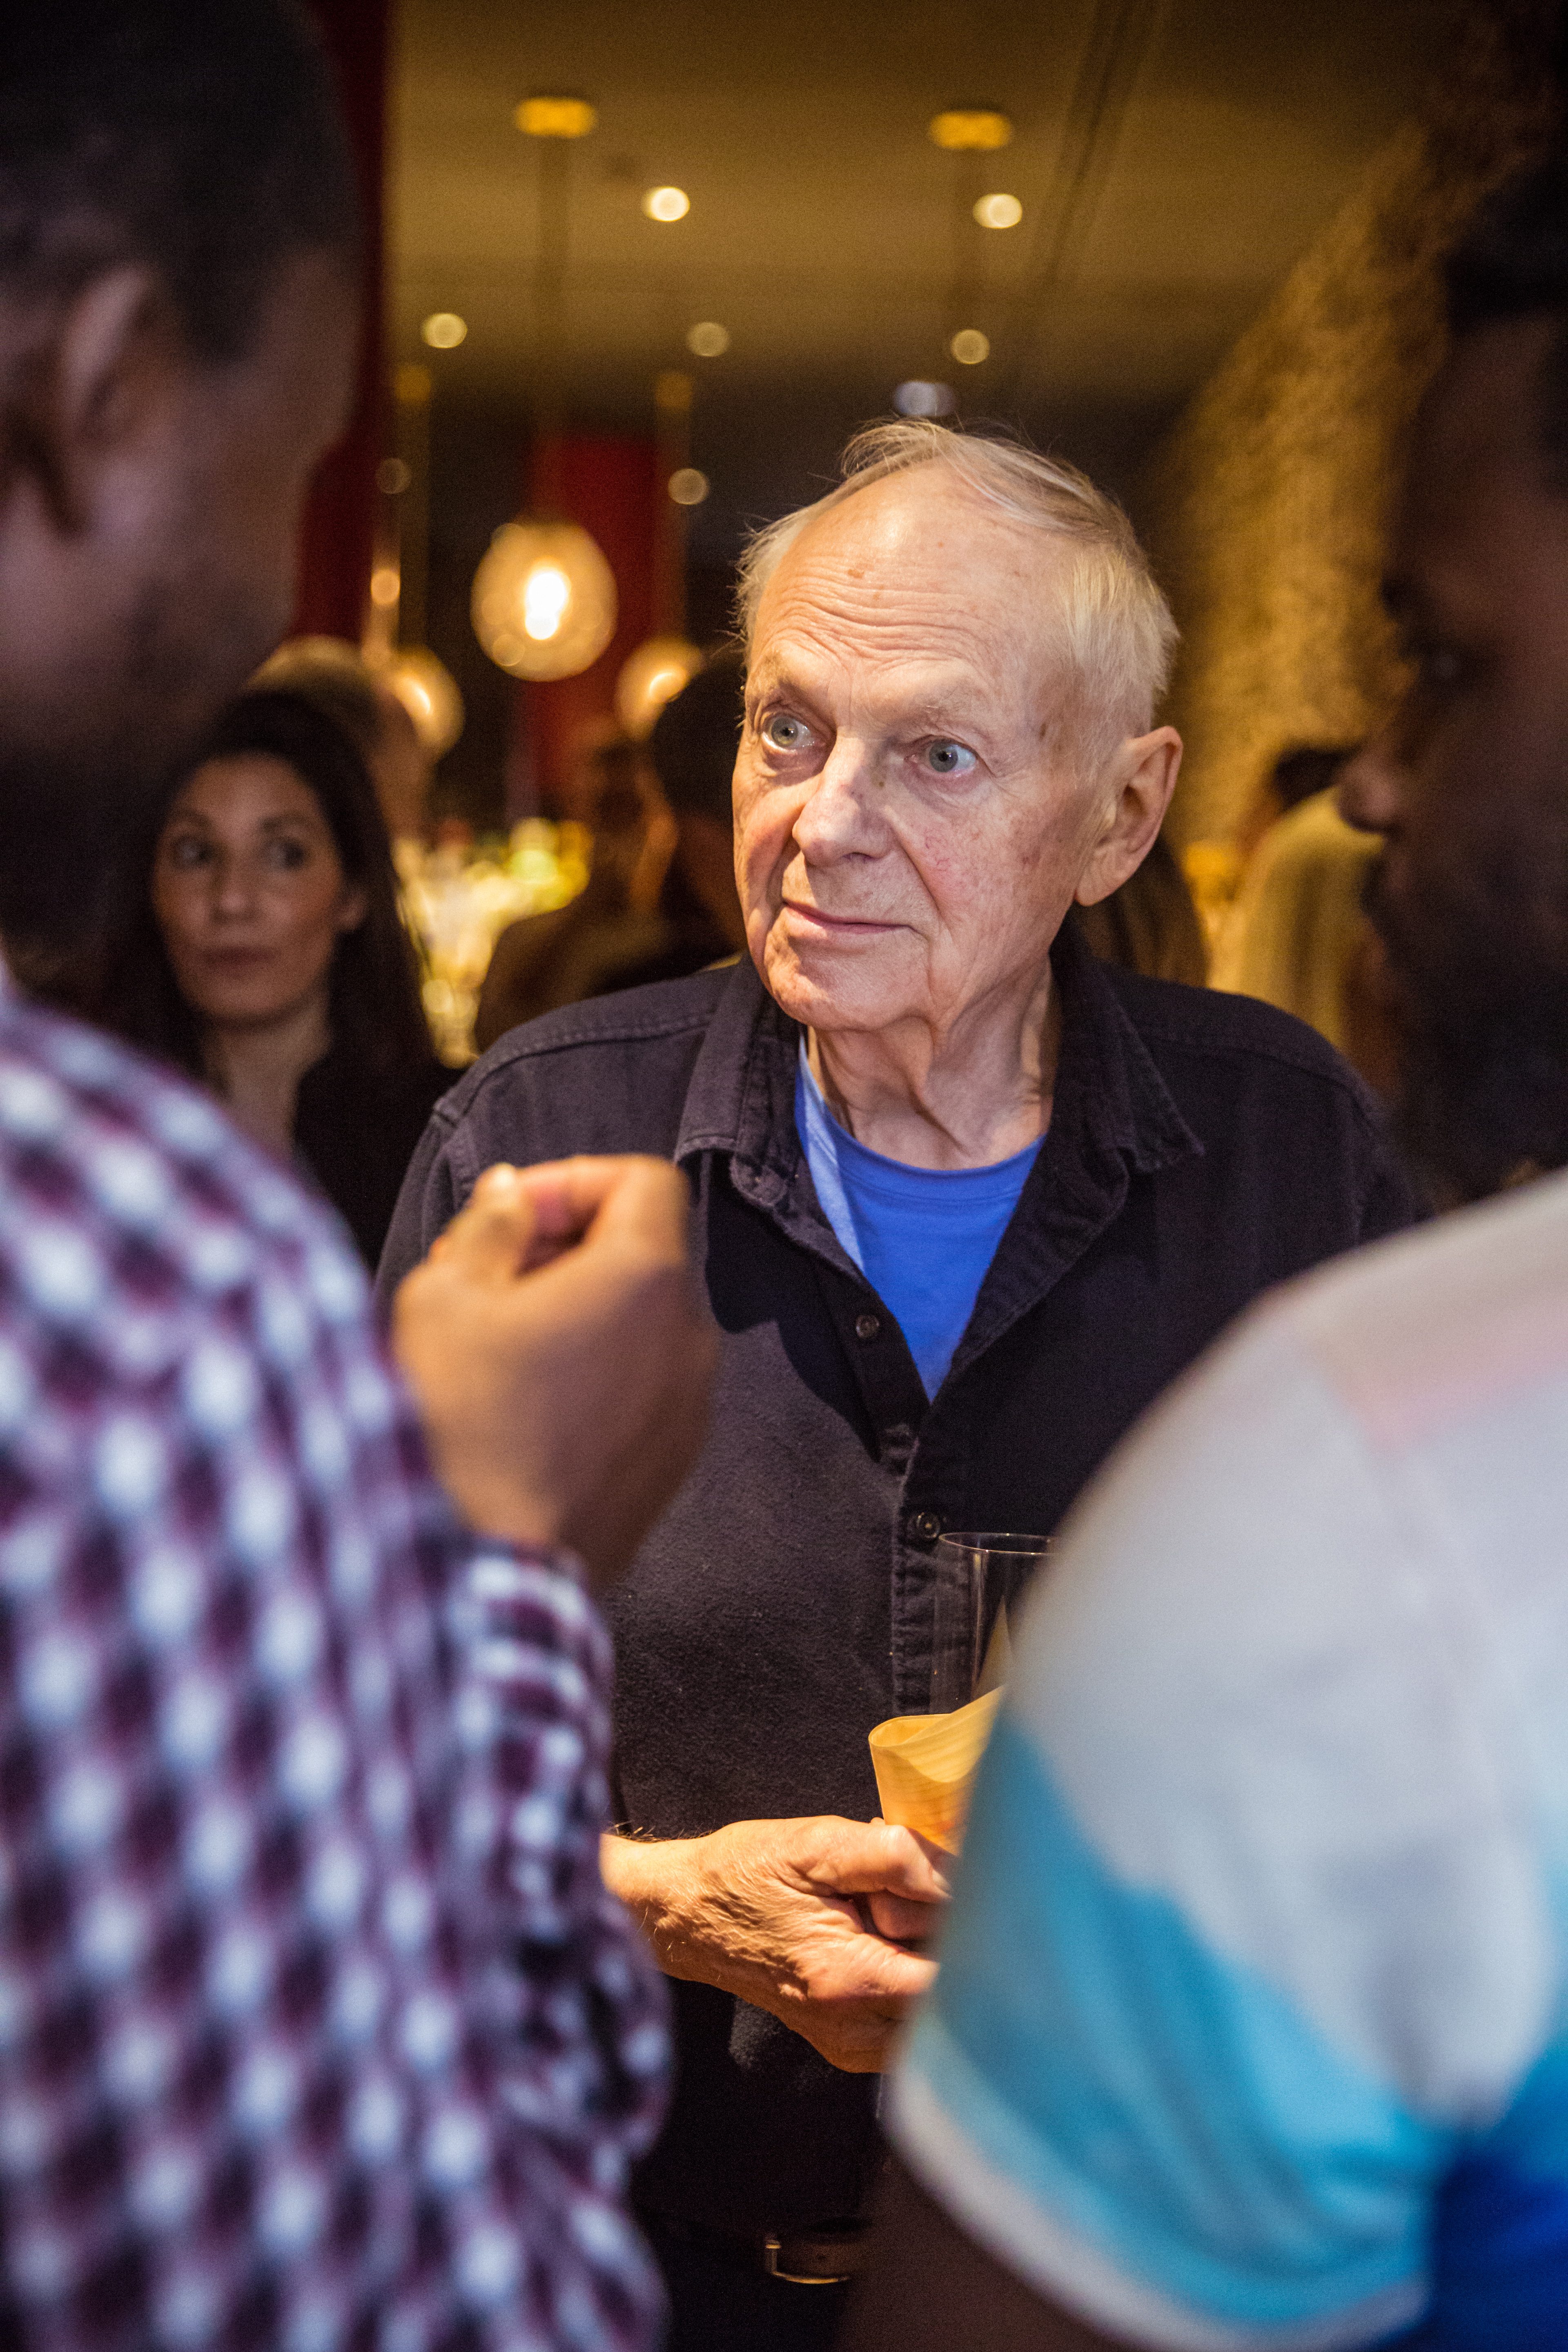 An evening with Aardman, The Soho Hotel, London events photographer